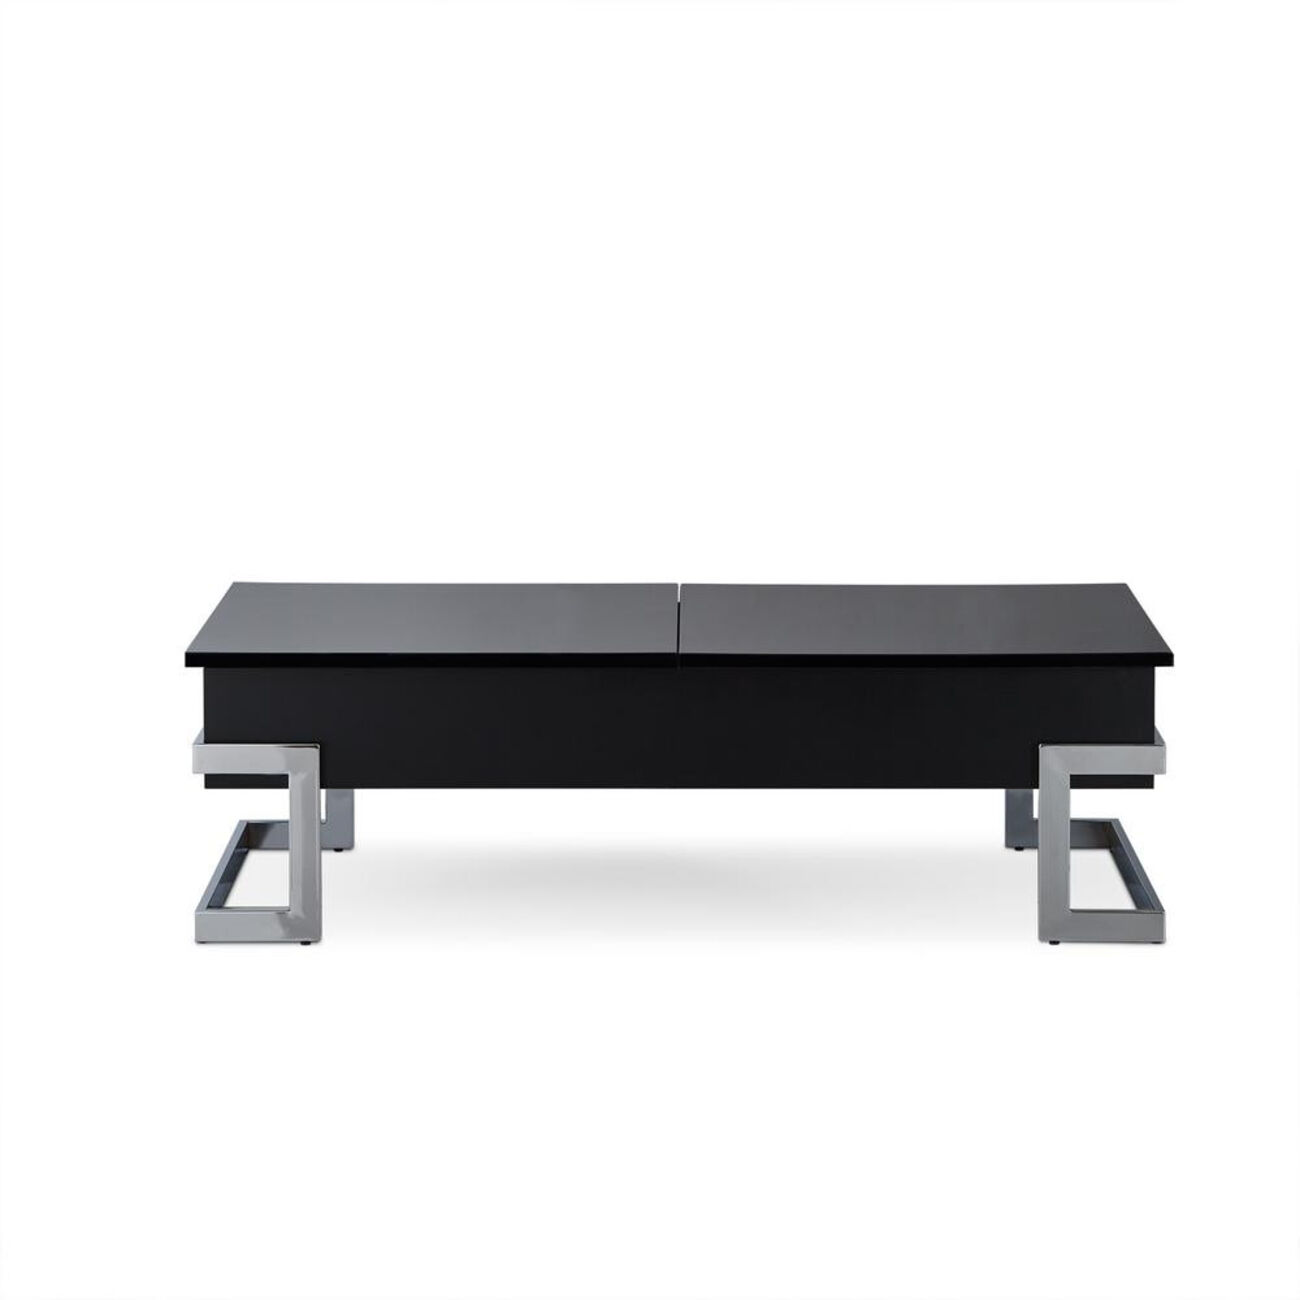 Wooden Coffee Table With Lift Top Storage Space, Black